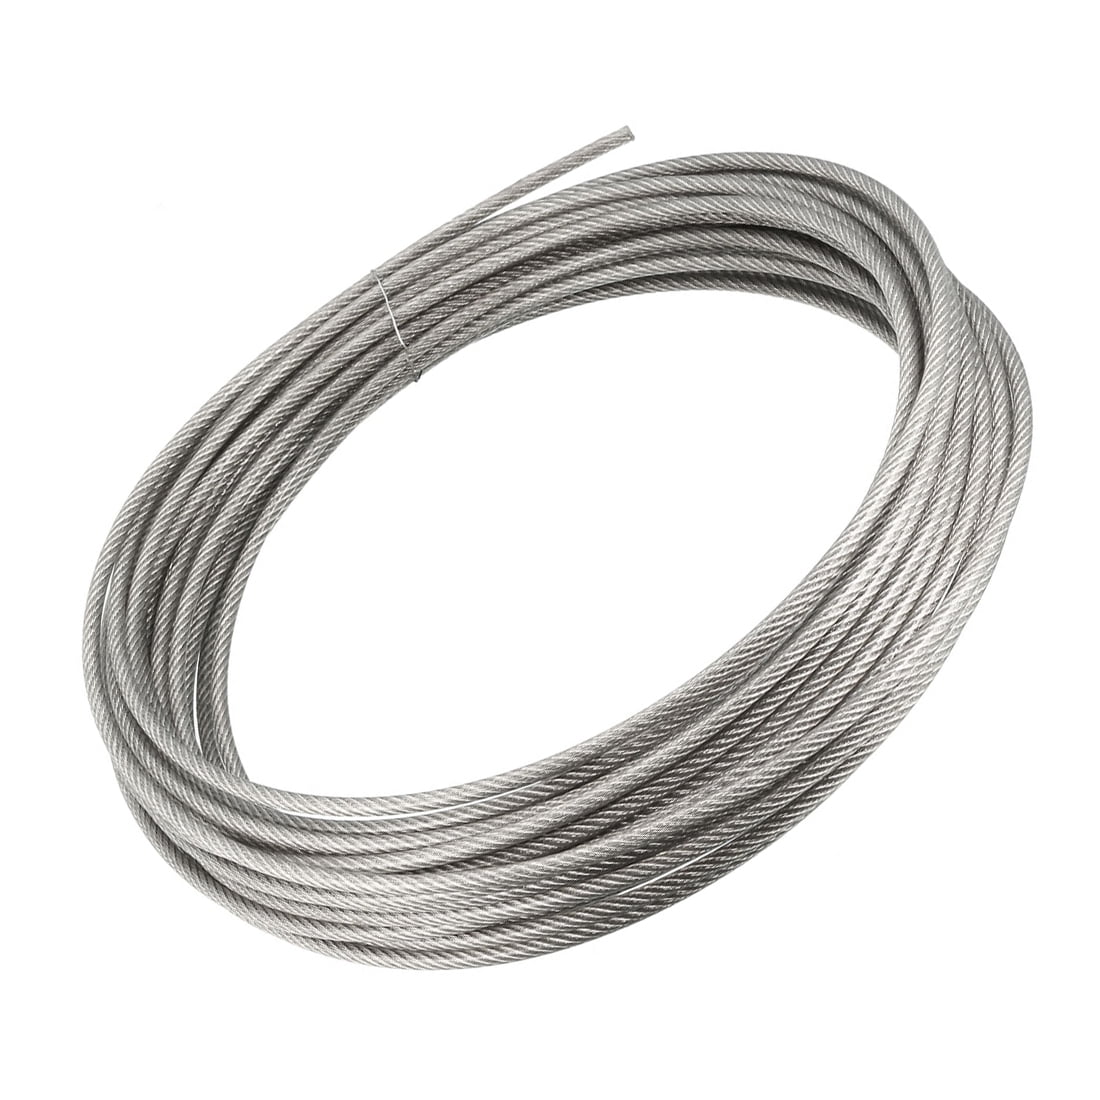 7x19 Stainless Steel T316 Cable Wire Rope 25' 2.5mm 3/32"